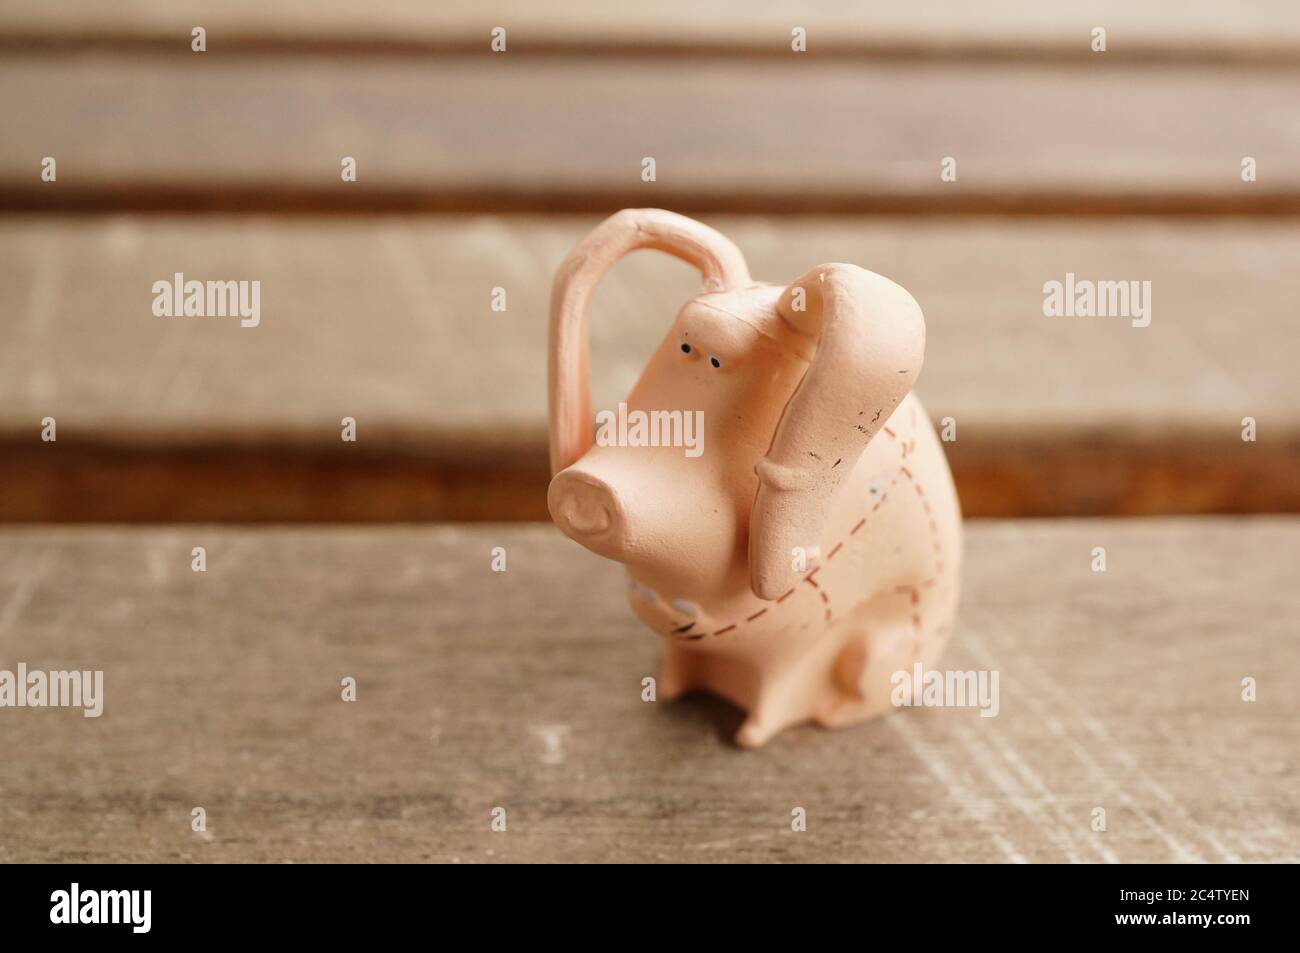 POZNAN, POLAND - Jun 07, 2020: Plastic Tattoo toy pig figurine from the  Secret Life Of Pets movie on a wooden surface Stock Photo - Alamy